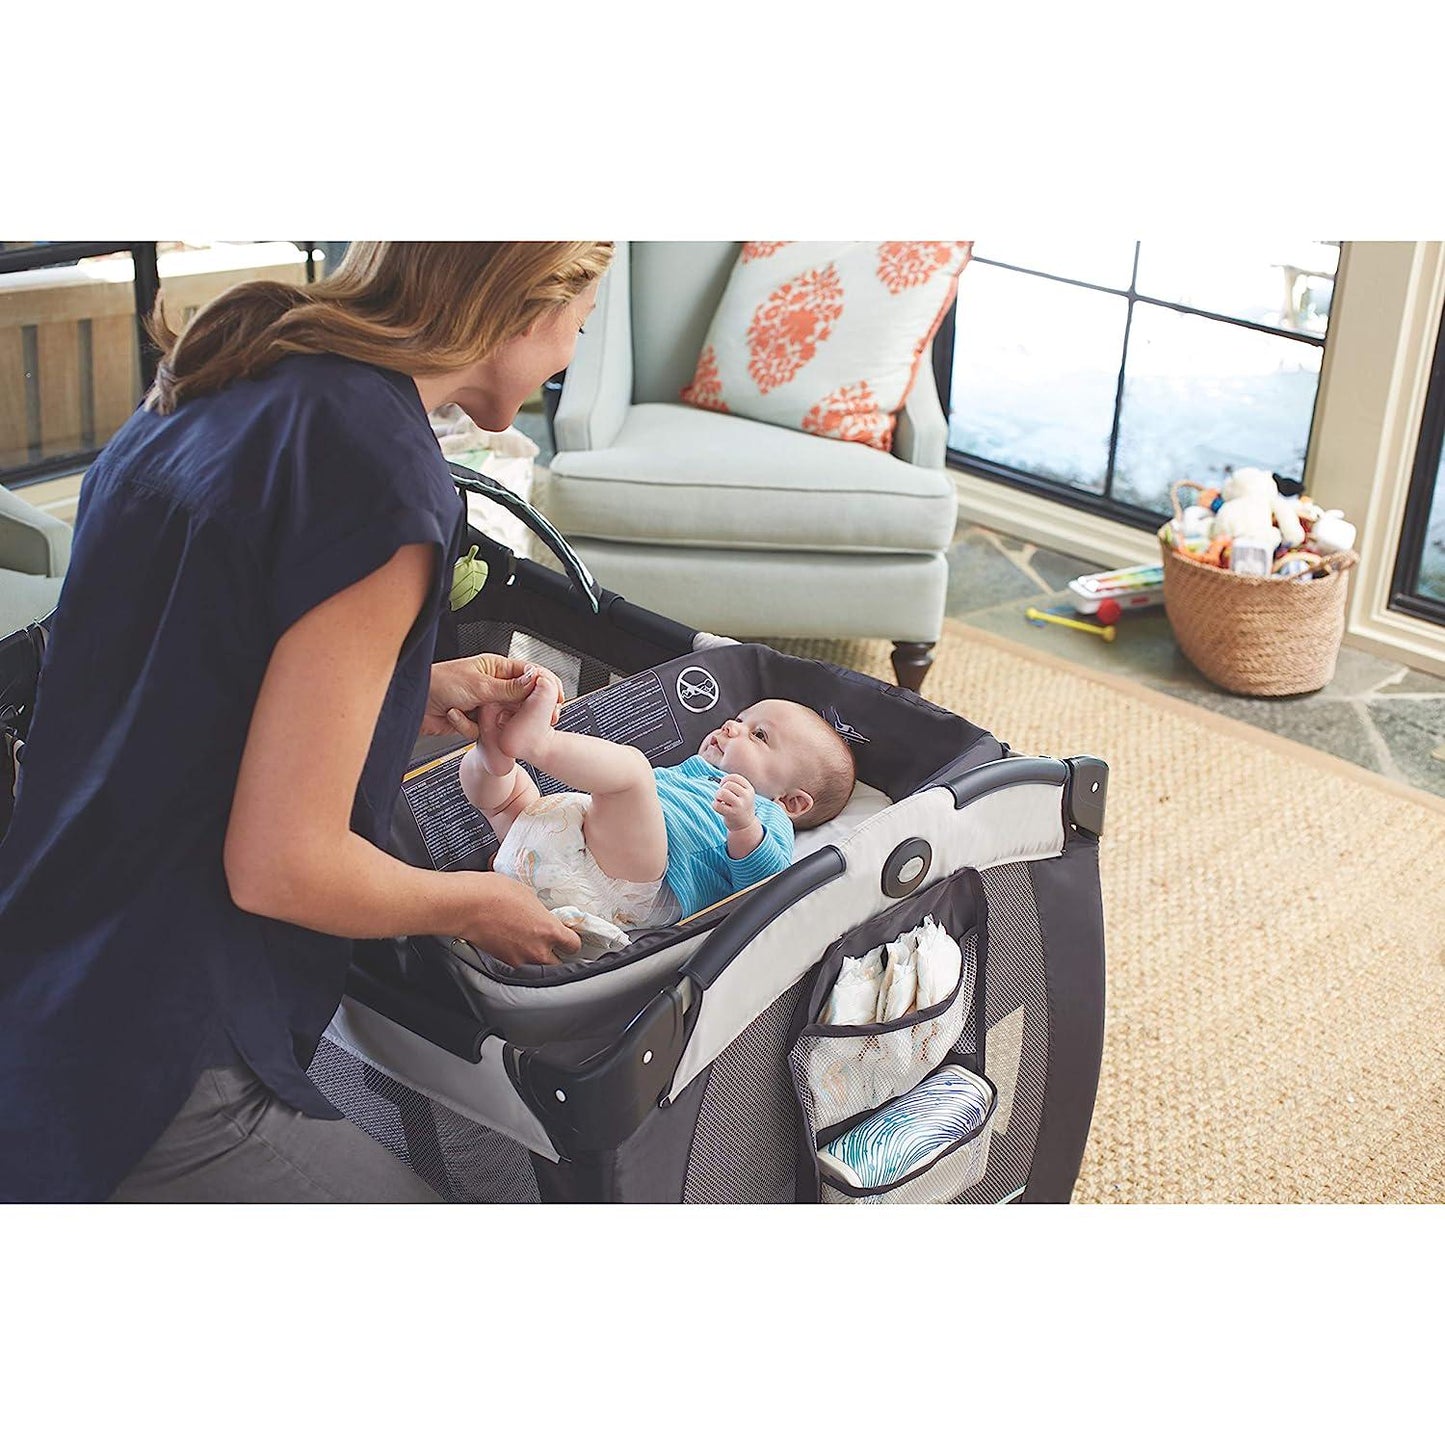 Pack 'n Play Playard with Reversible Seat and Changer LX, Basin